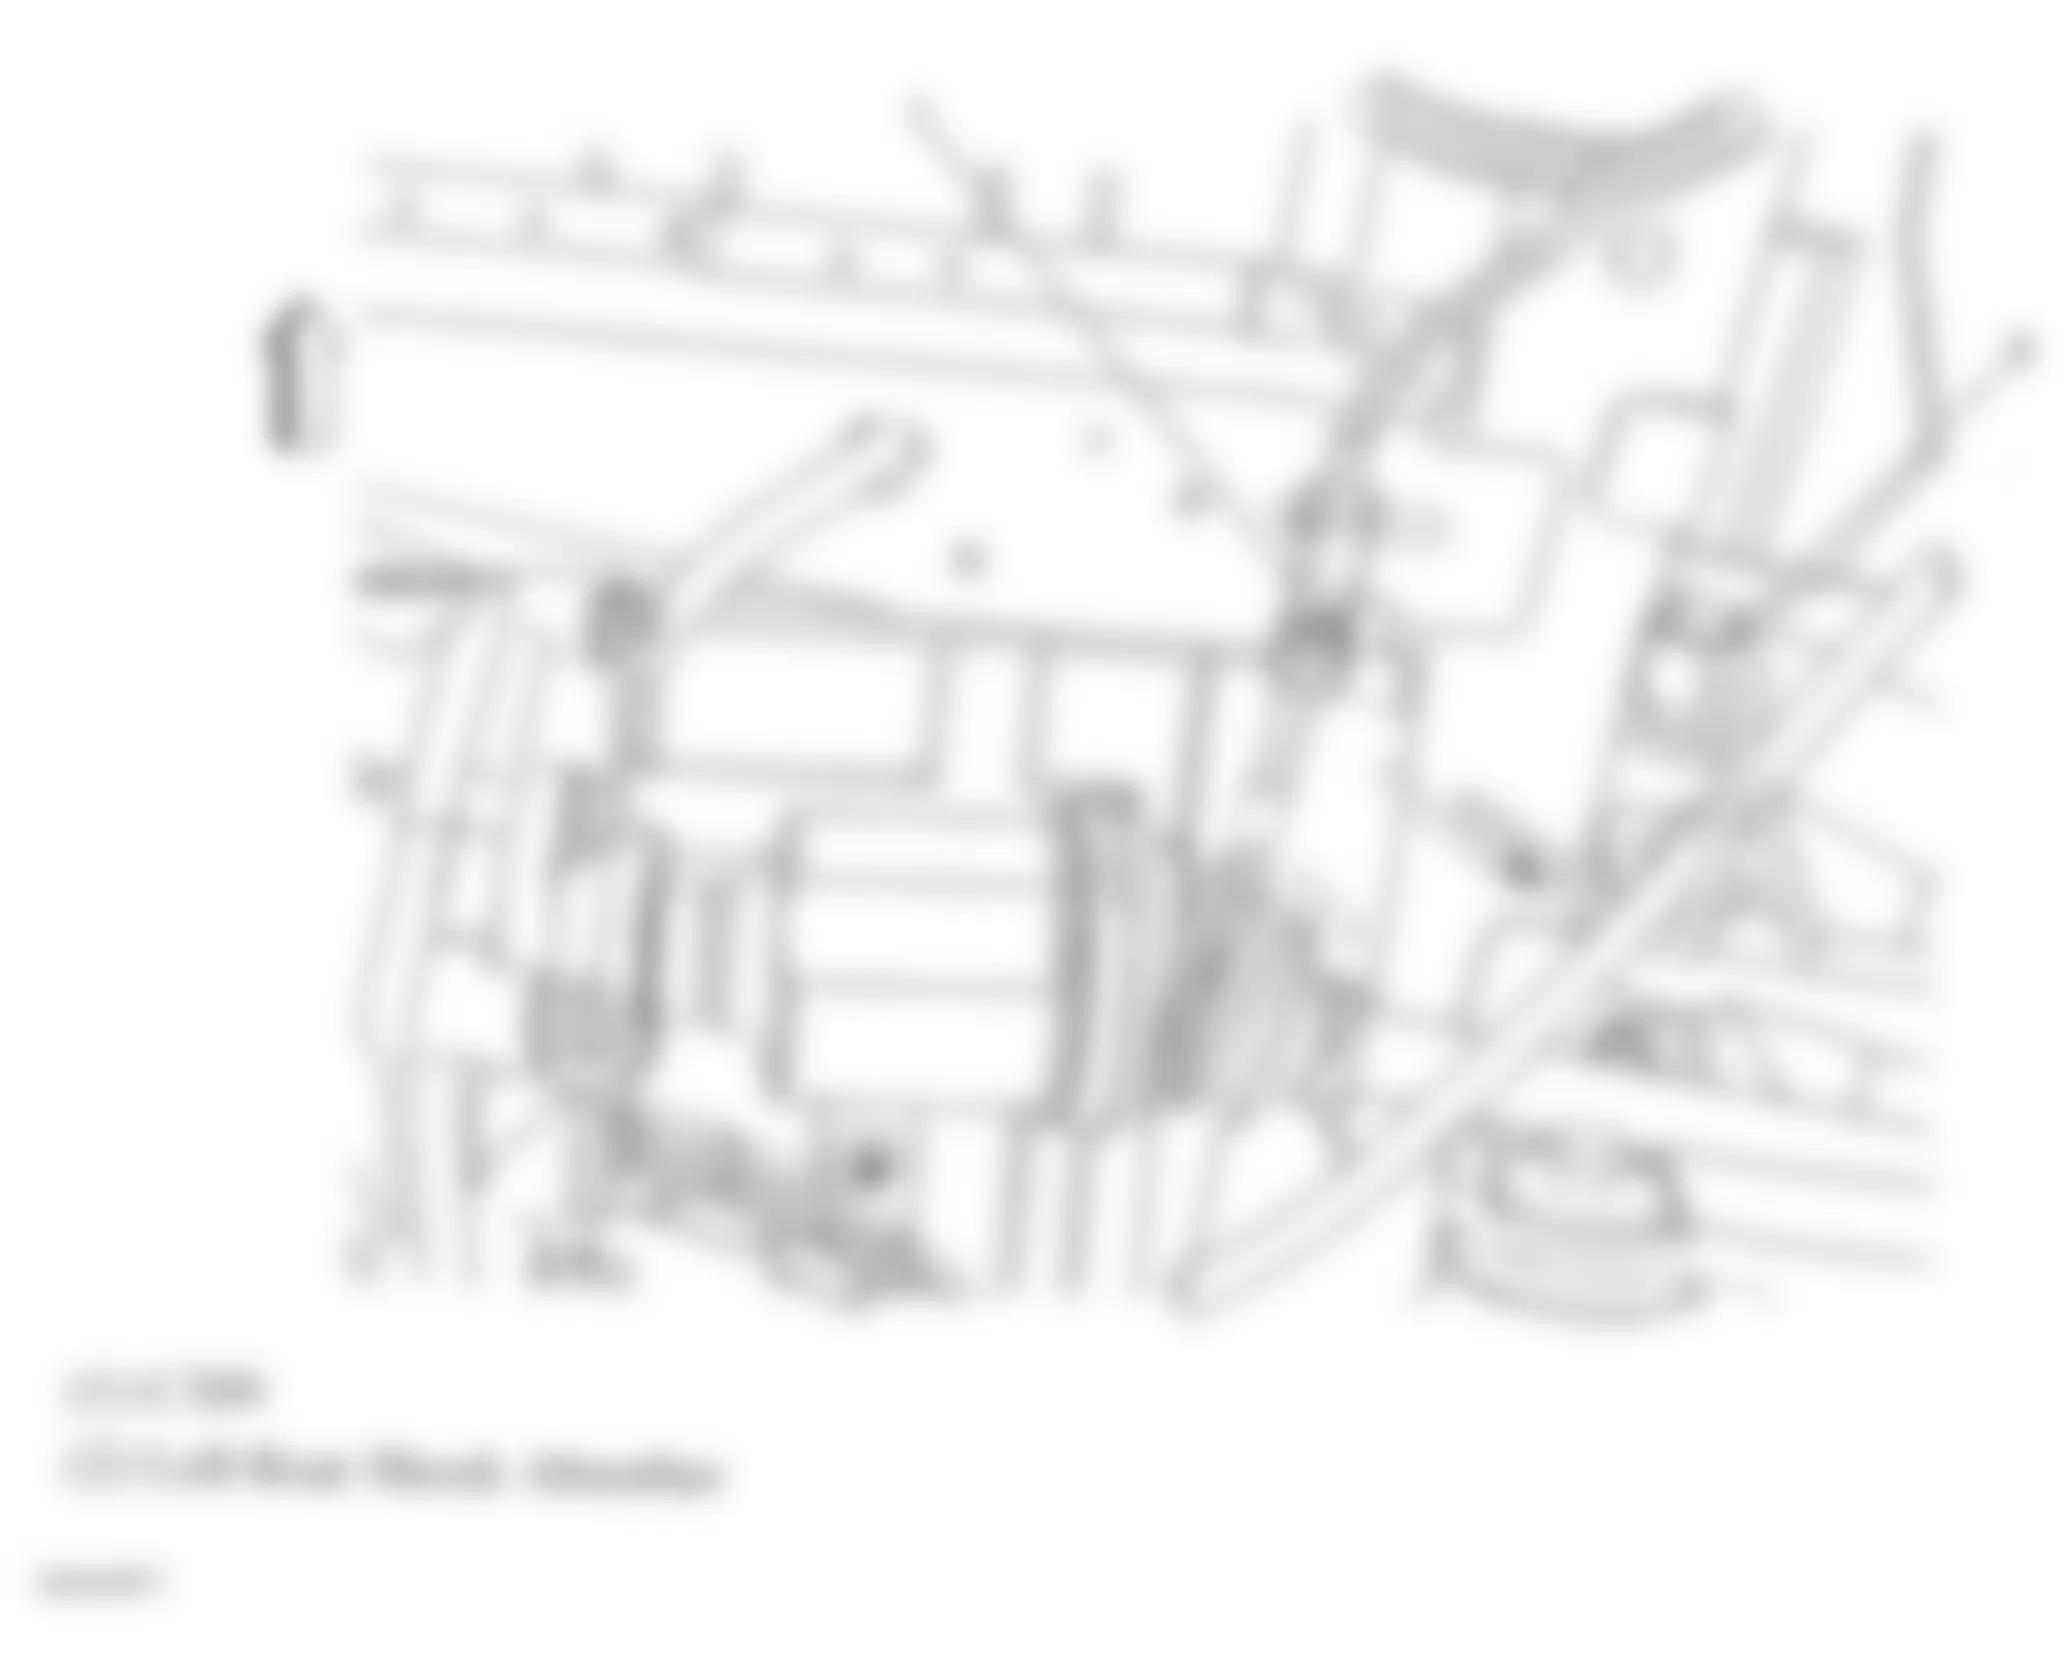 Buick Rendezvous CXL 2007 - Component Locations -  Under Left Rear Of Vehicle